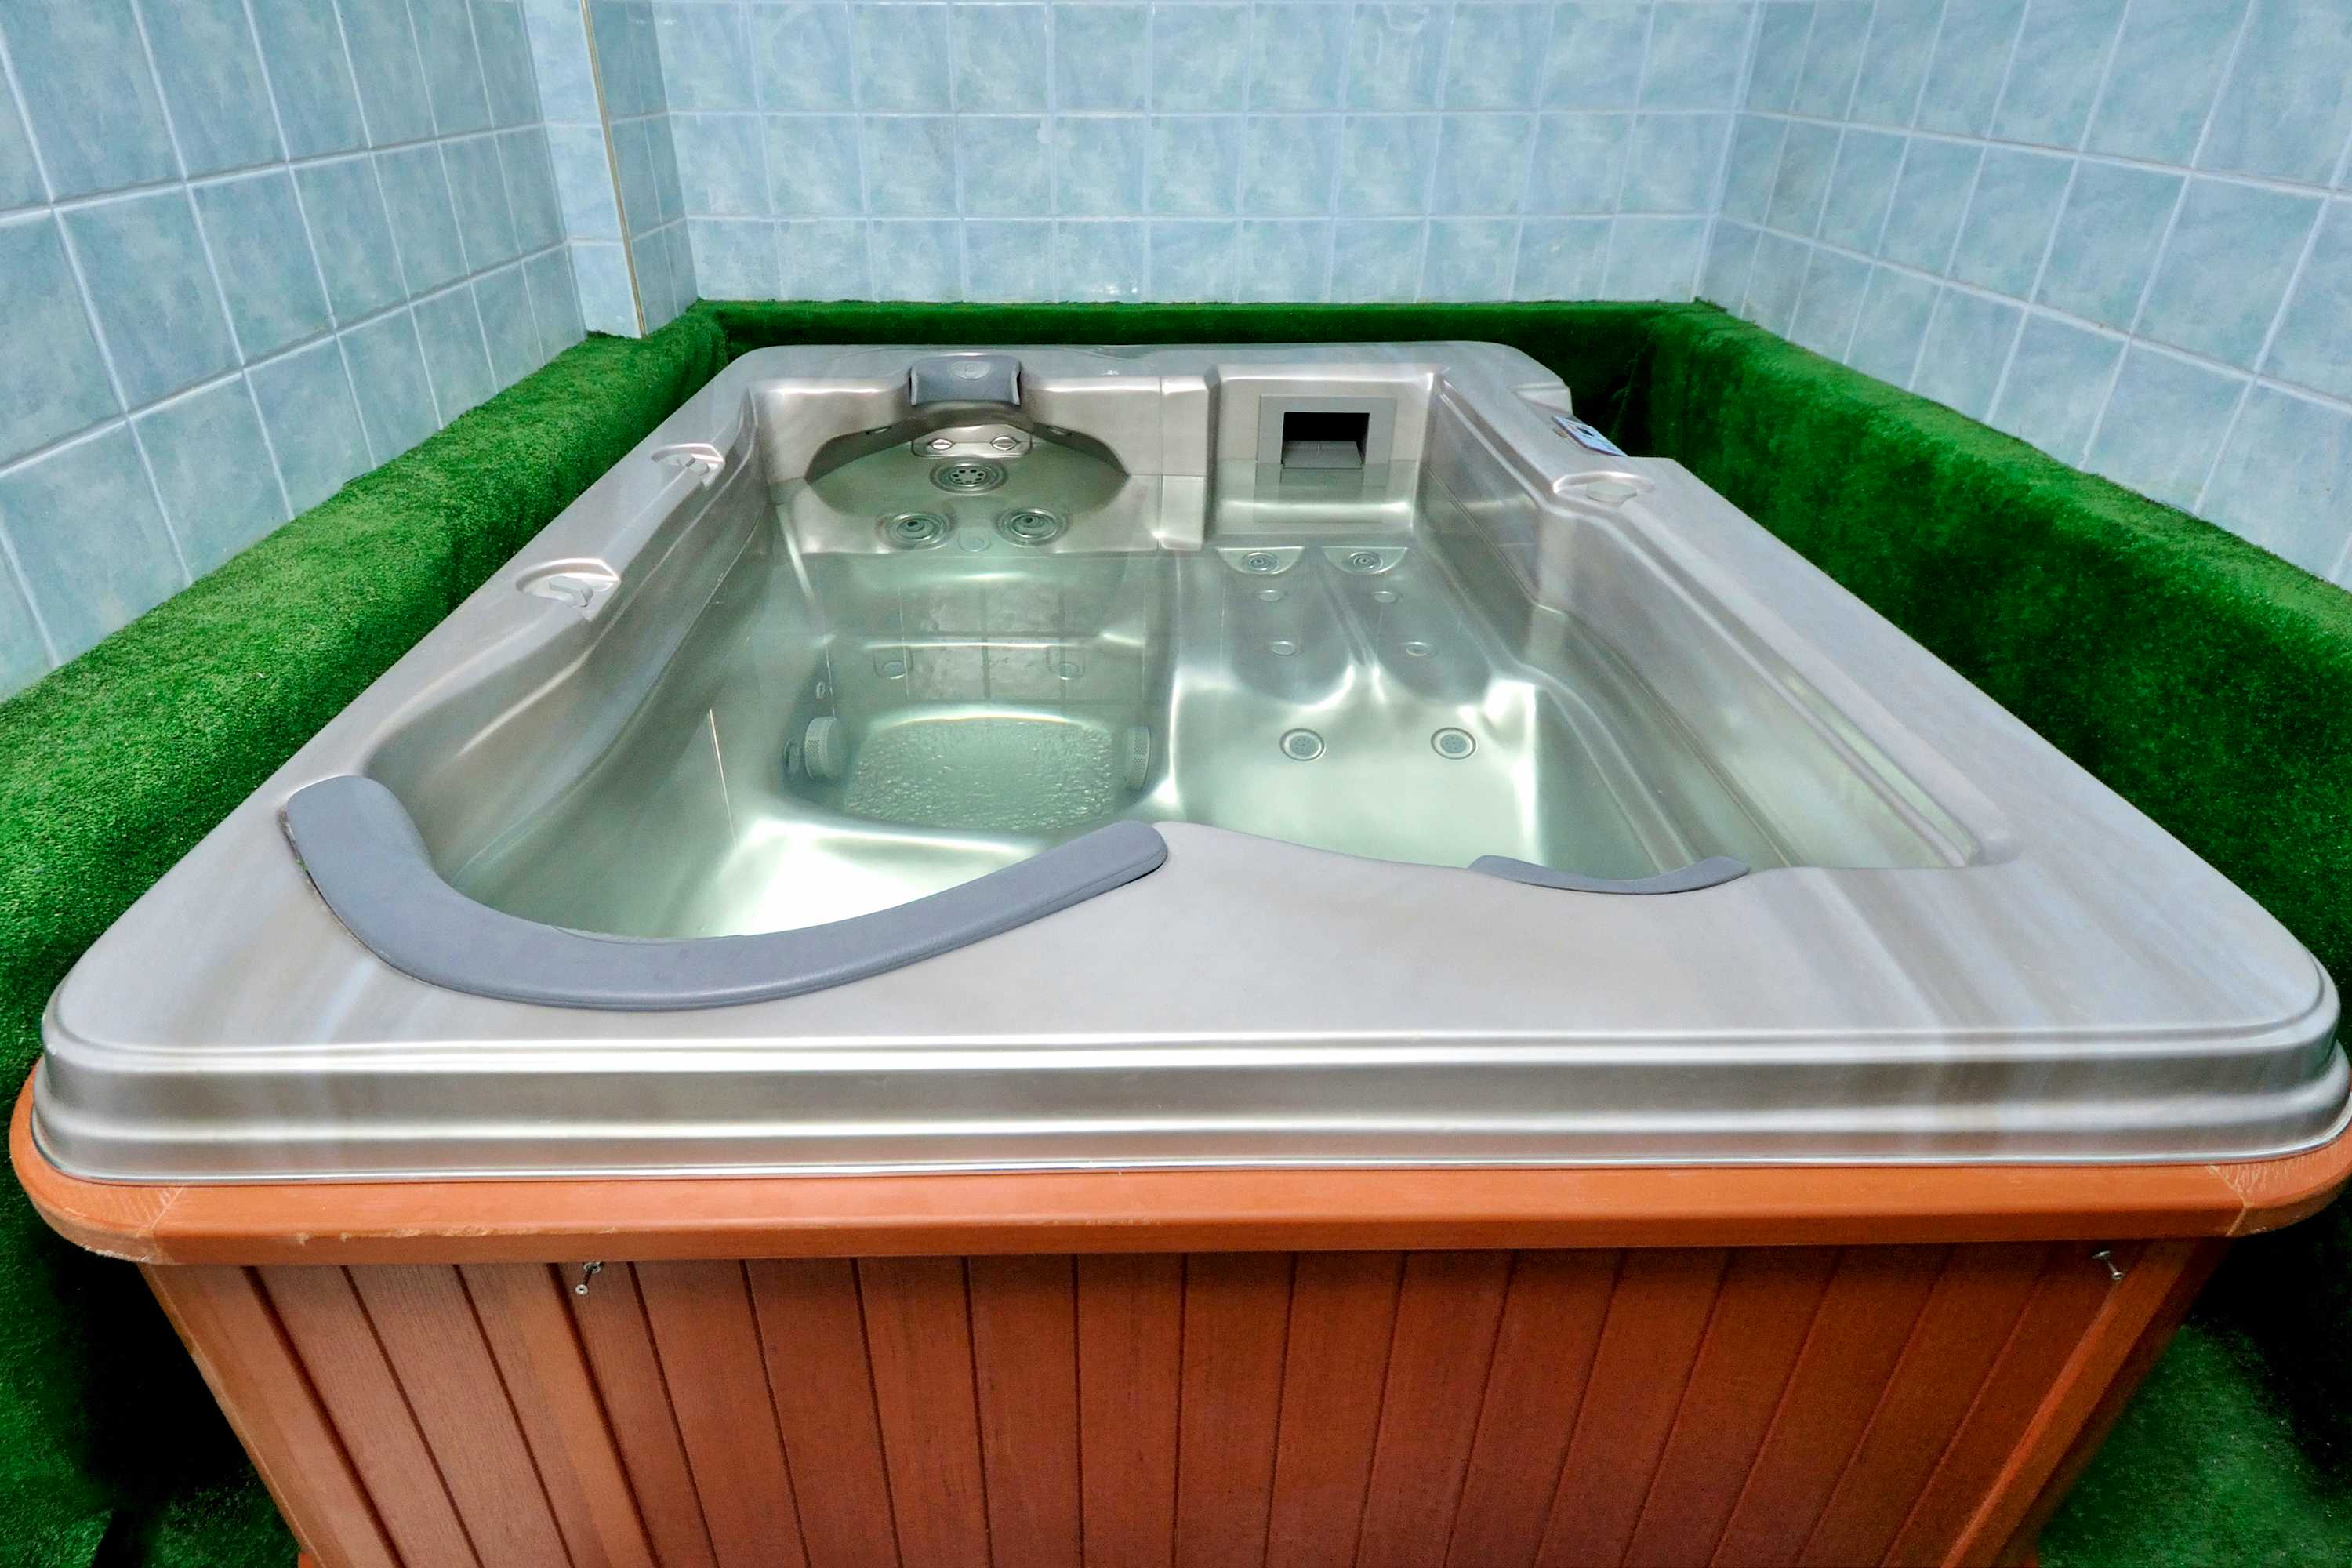 Photo Caption: Jacuzzi Relax & Unwind Spend time in the jacuzzi o